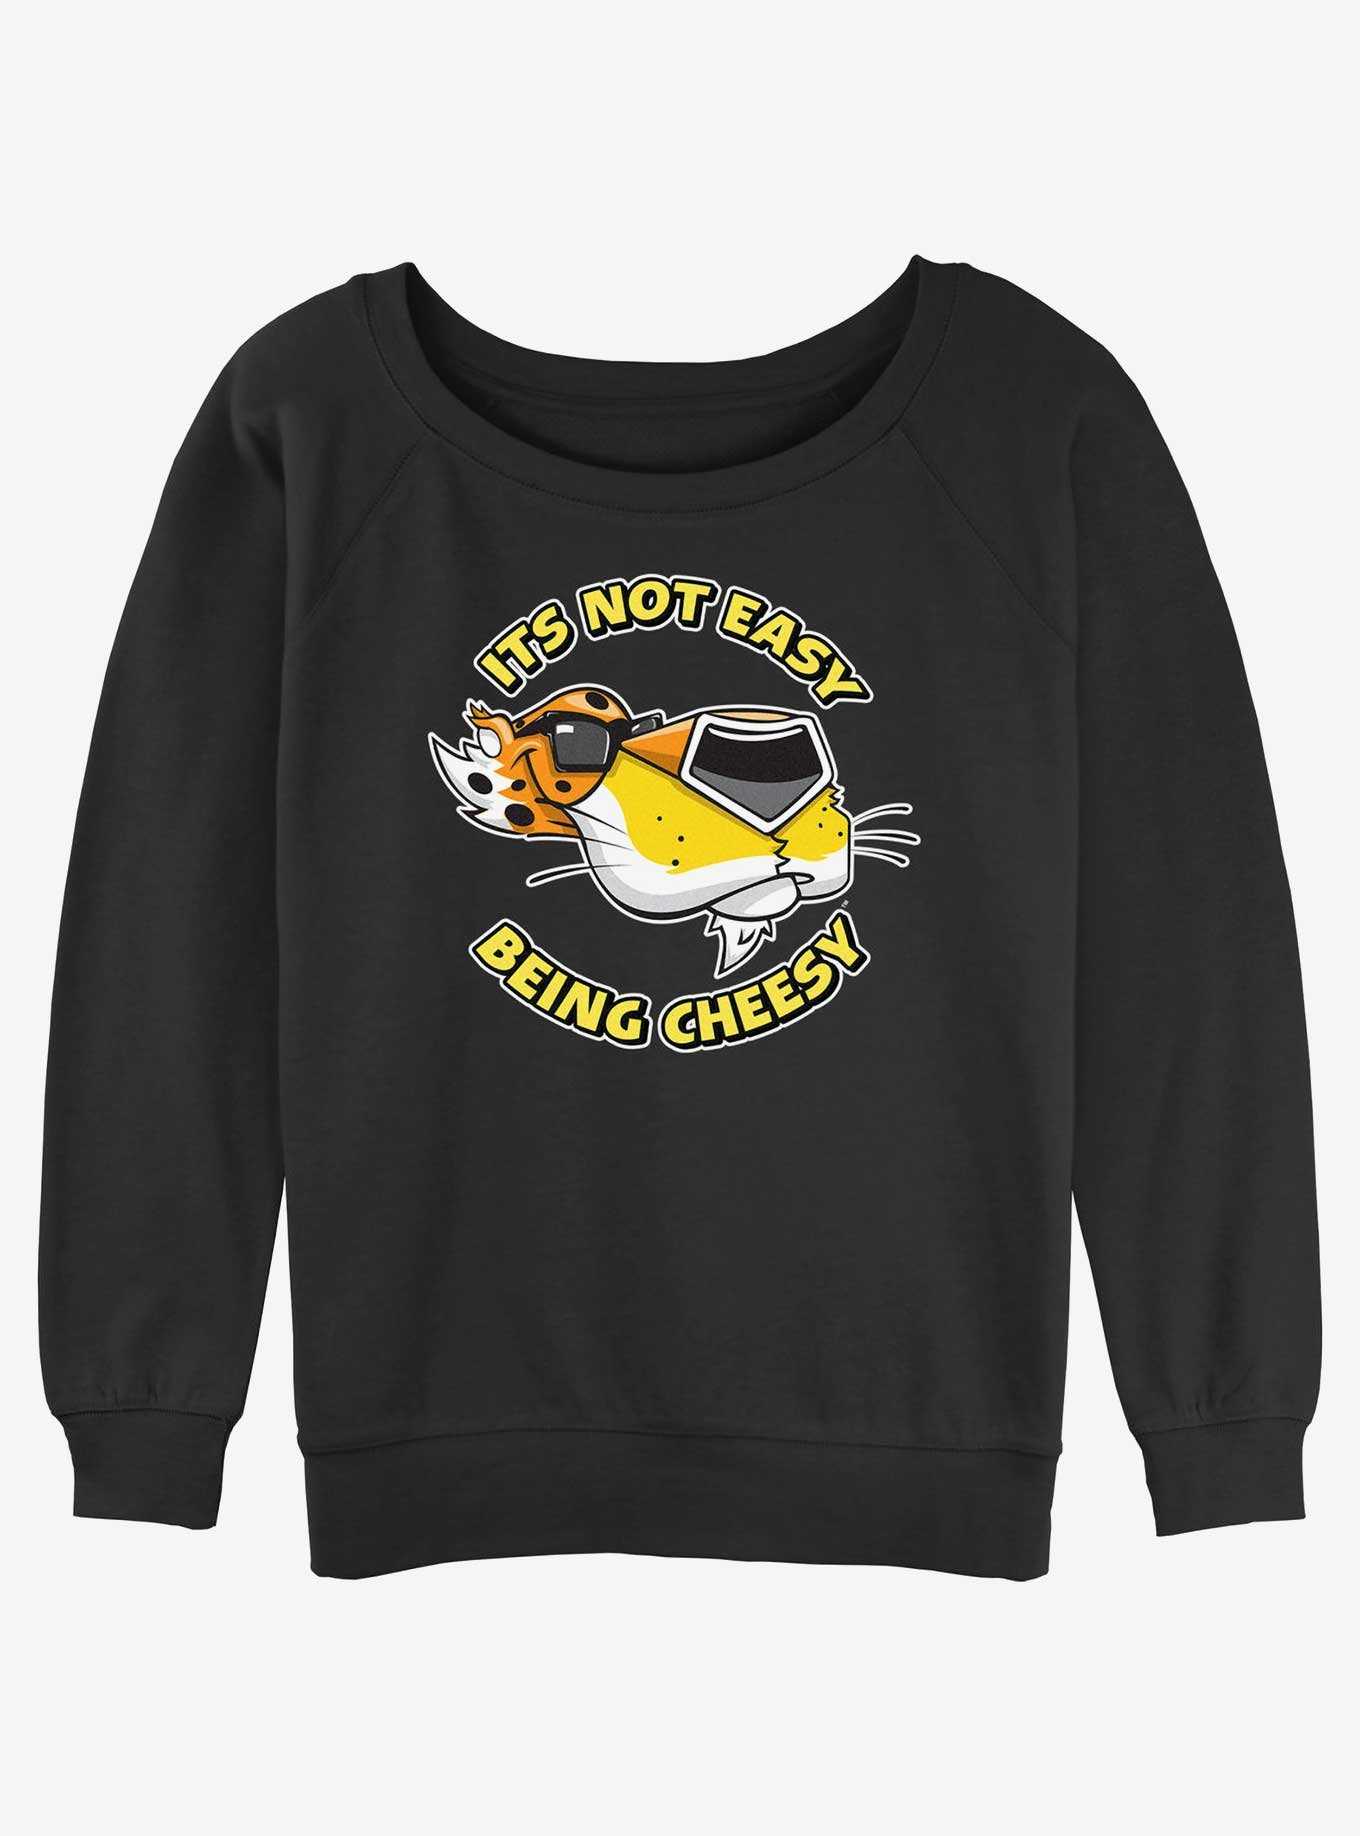 Cheetos Chester Not Easy Being Cheesy Girls Slouchy Sweatshirt, , hi-res